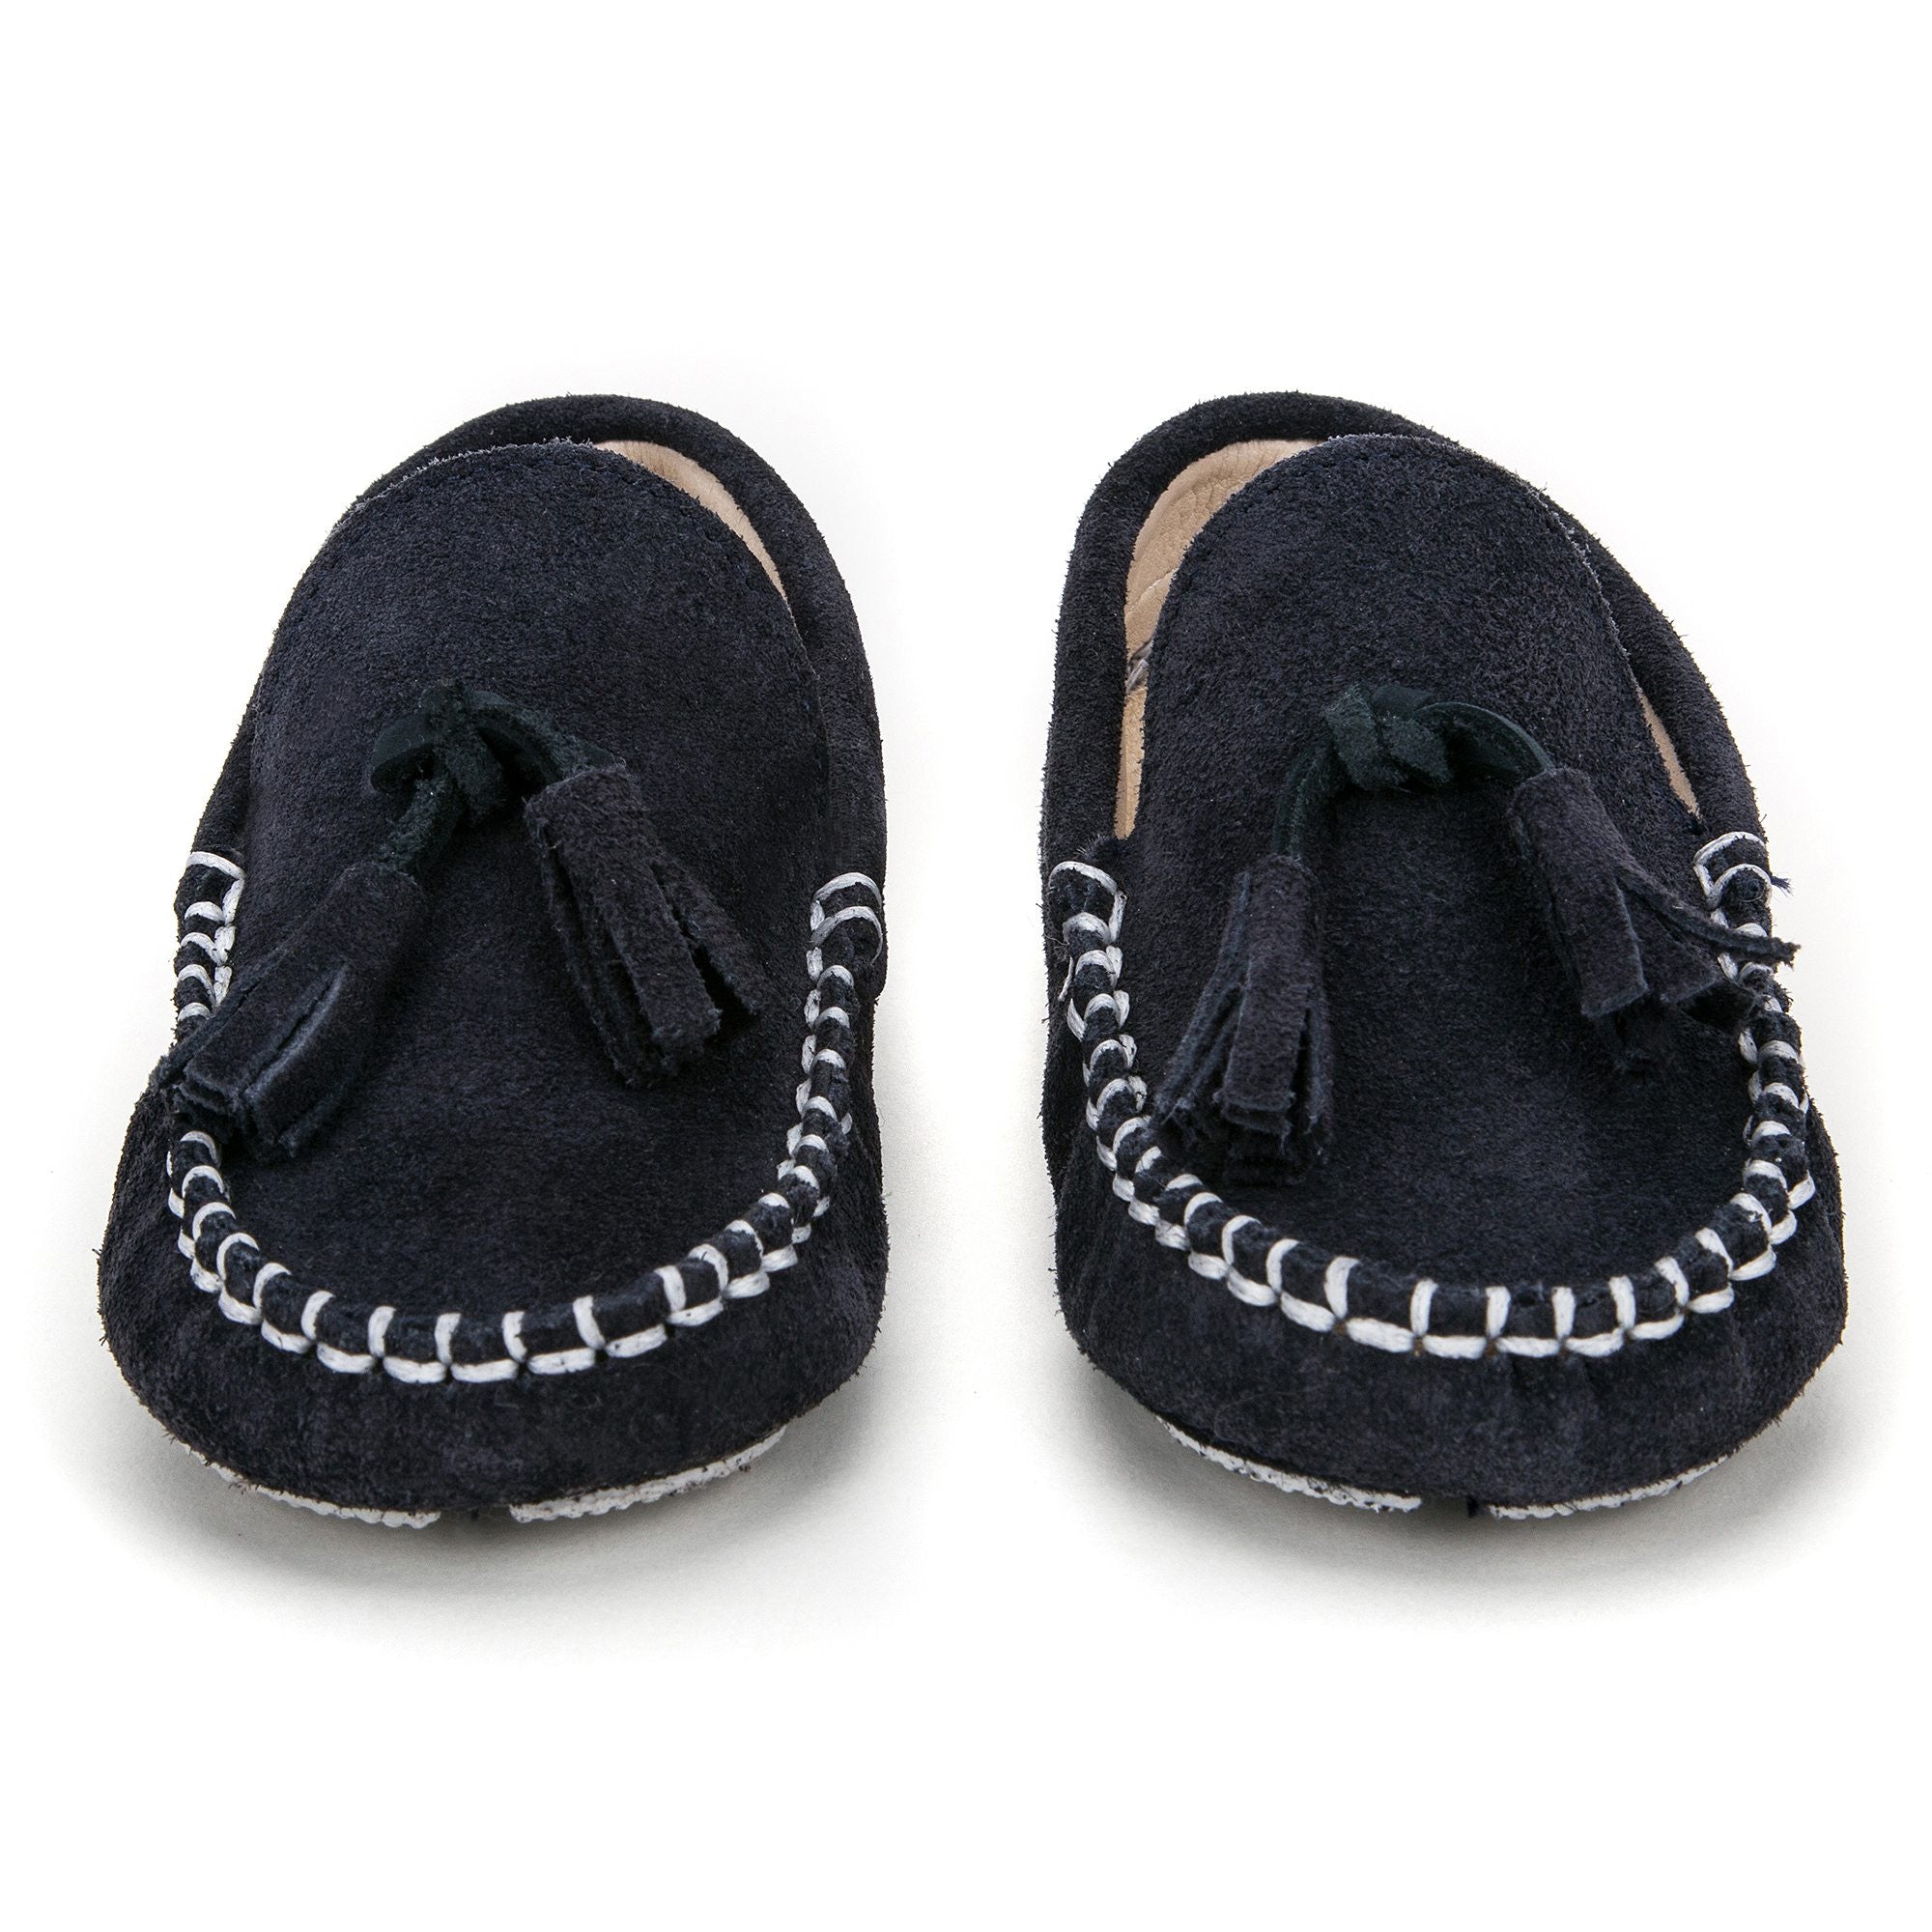 Boys & Girls Navy Blue Suede Leather Tasselled Loafers